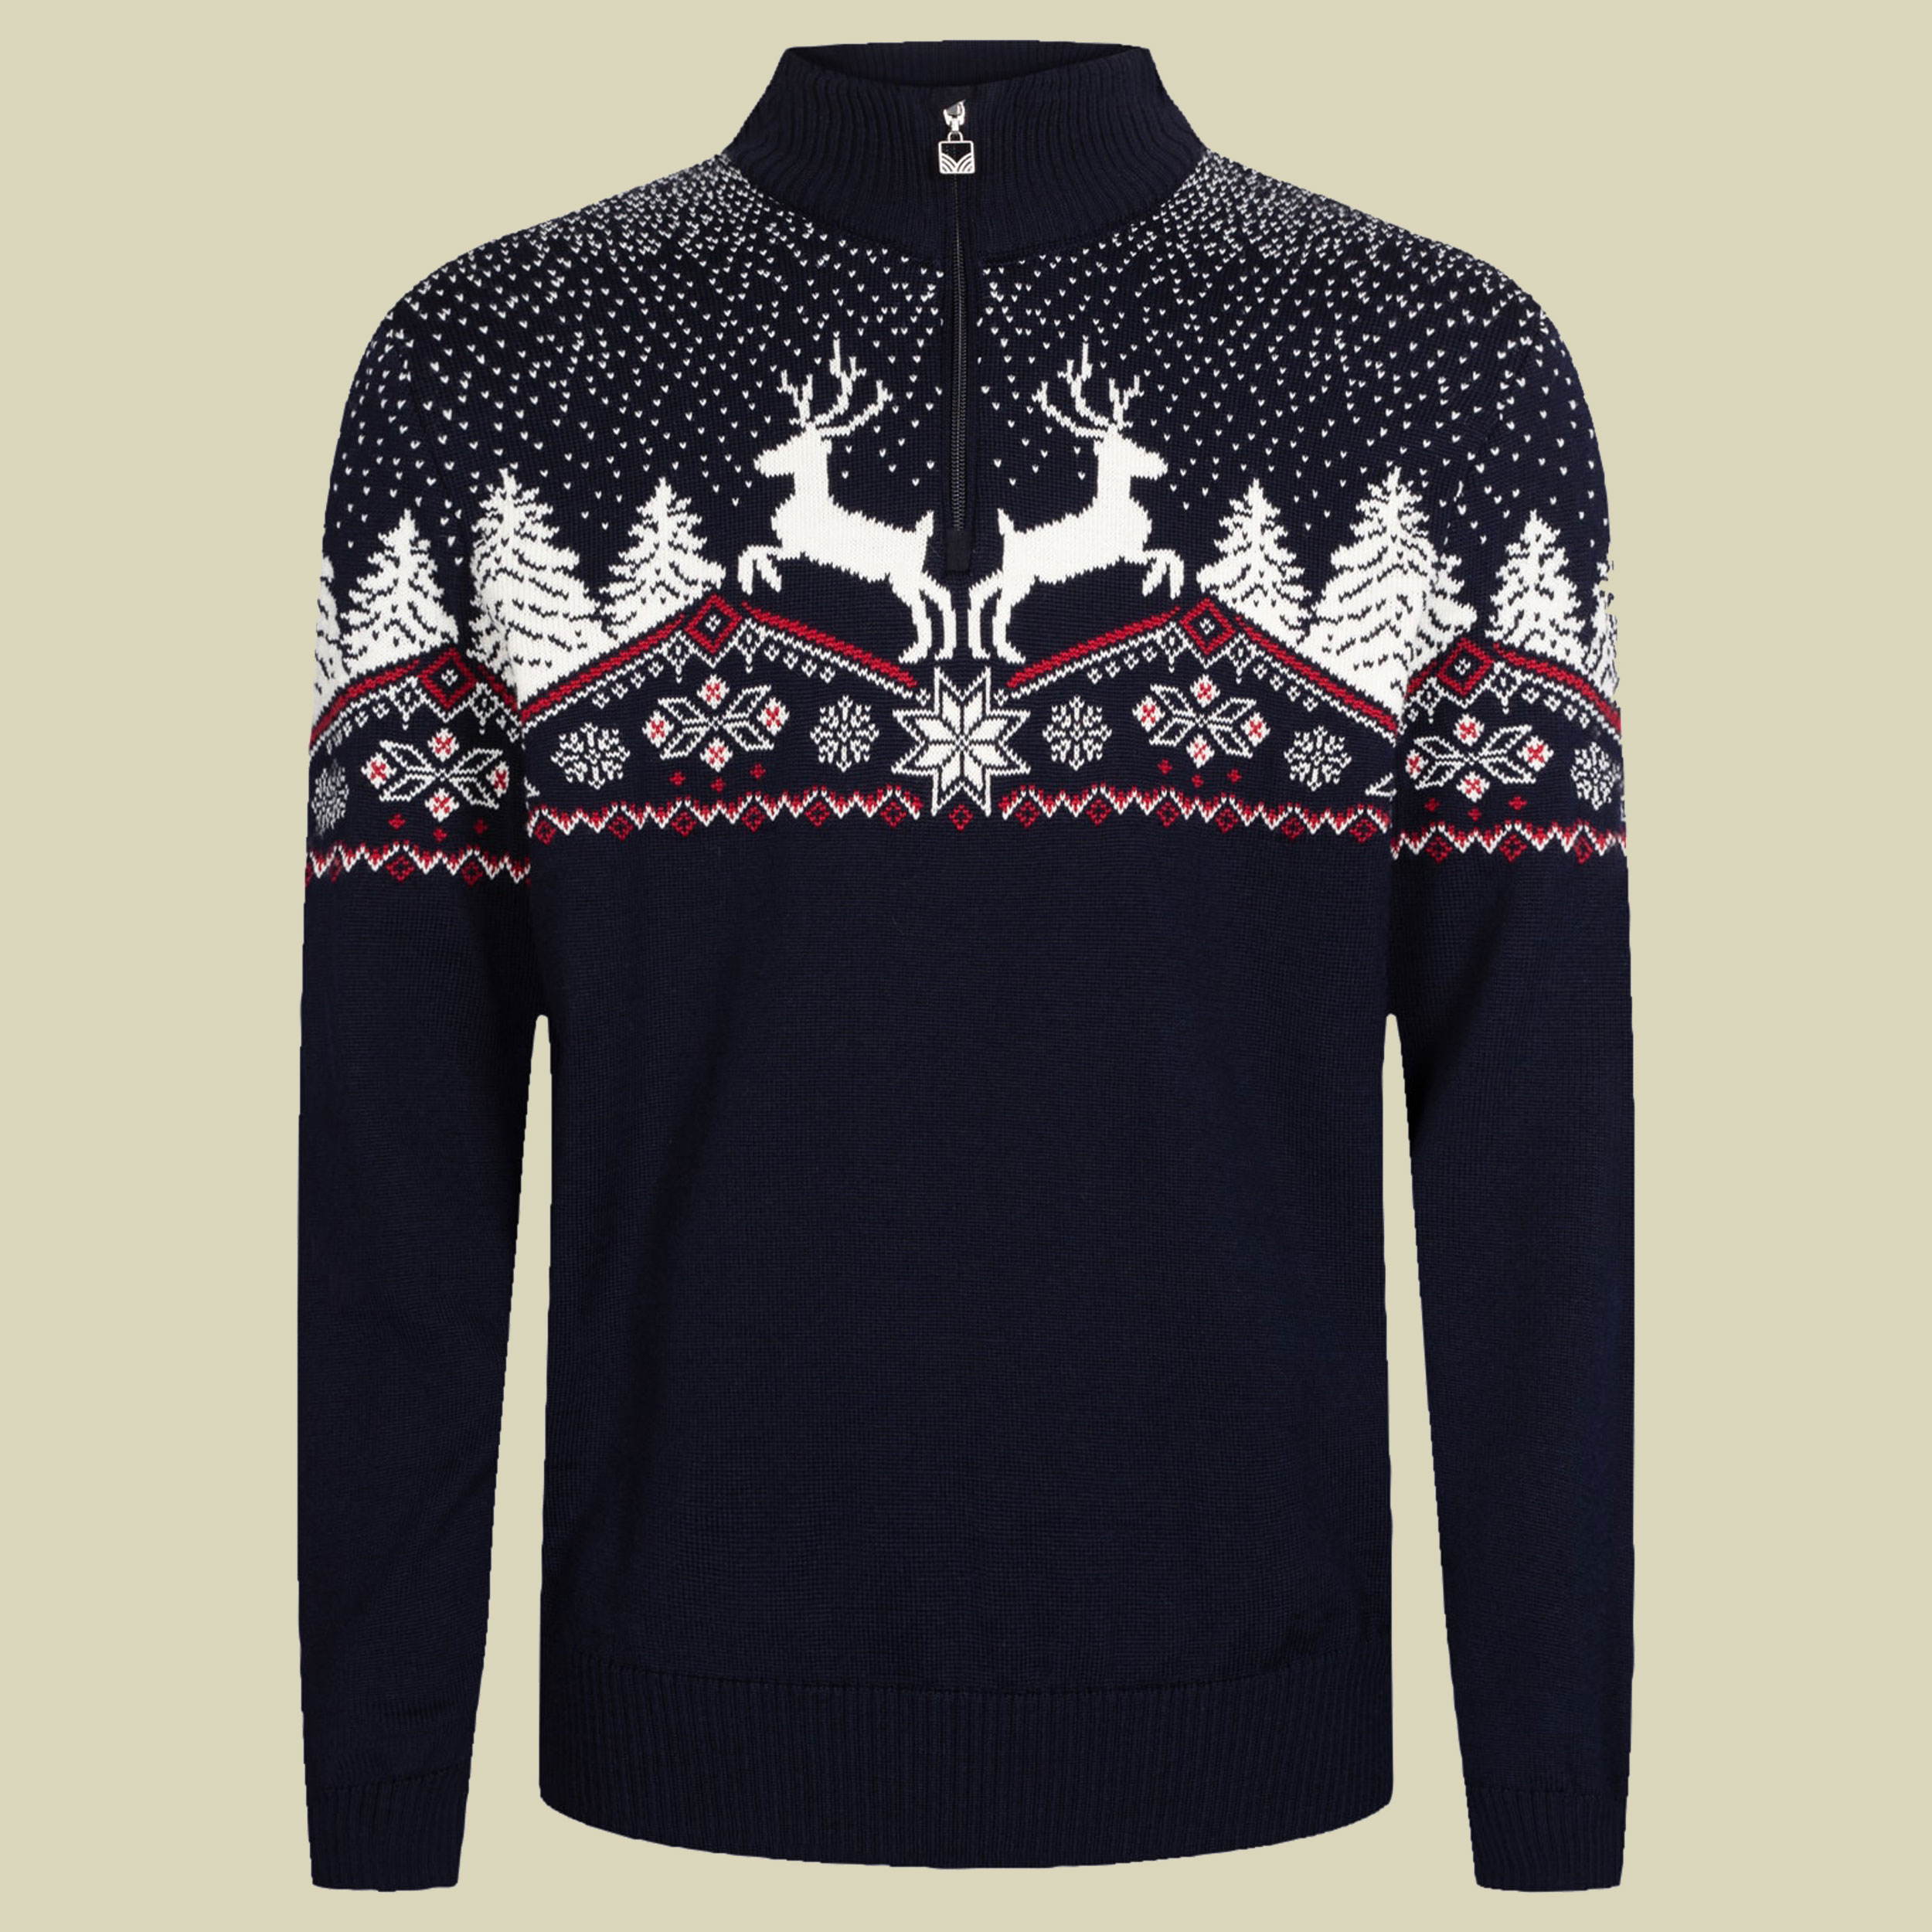 Dale Christmas Sweater Men Größe S Farbe navy offwhite redrose